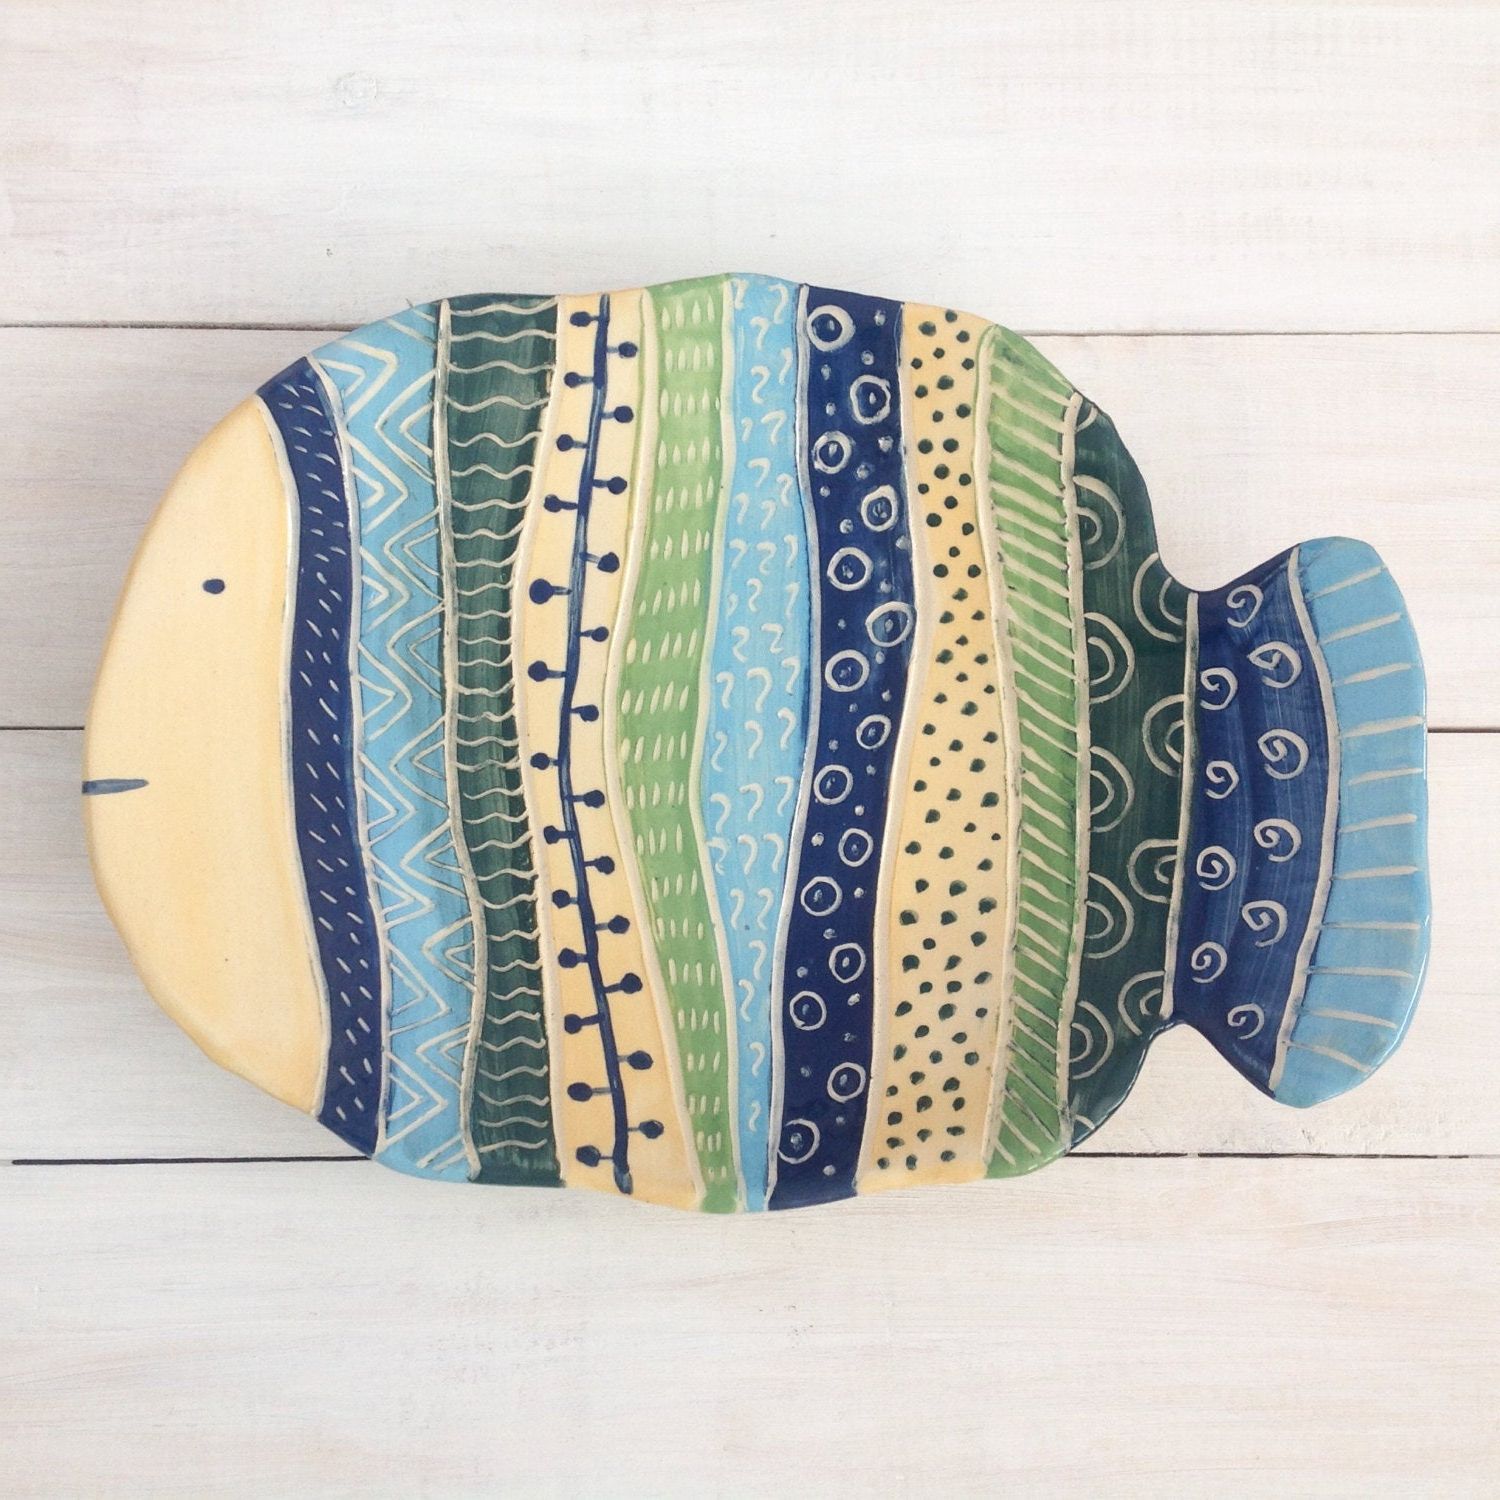 Etsy Intended For Most Current Ceramic Blue Fish Plate Wall Decor (View 16 of 20)